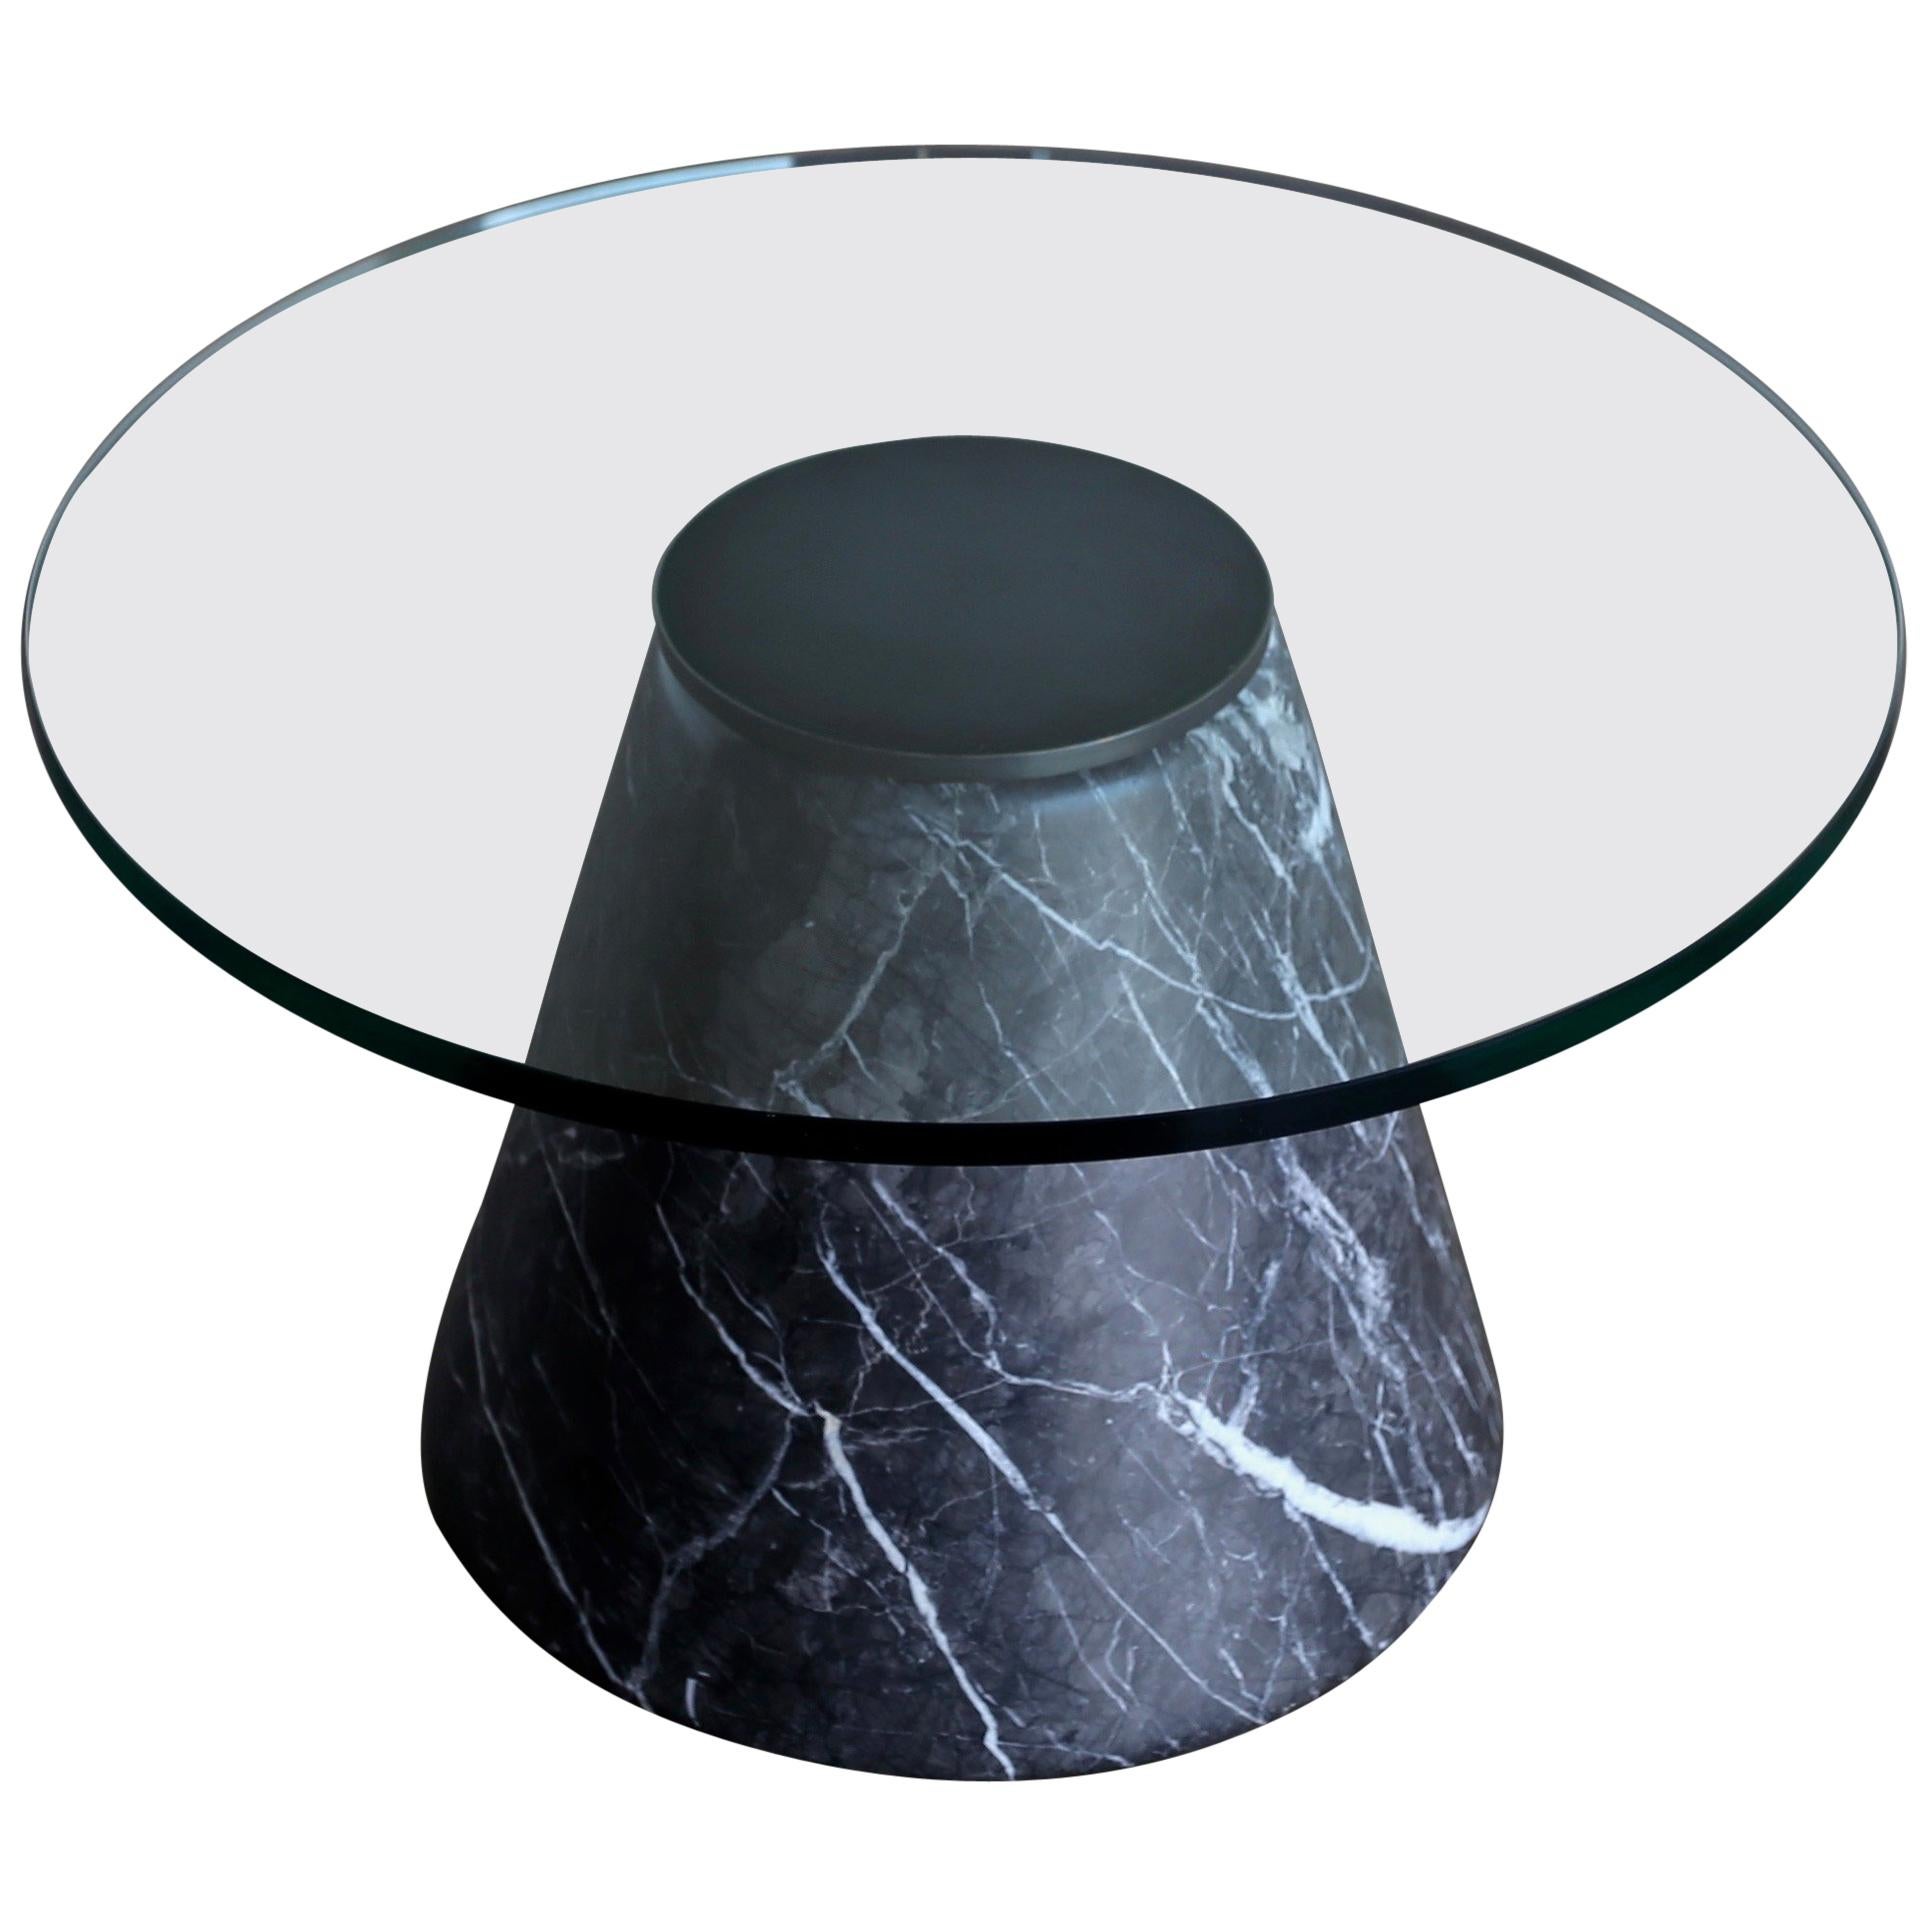 Lodovico Acerbis and Giotto Stoppino Marble Occasional Table, circa 1980